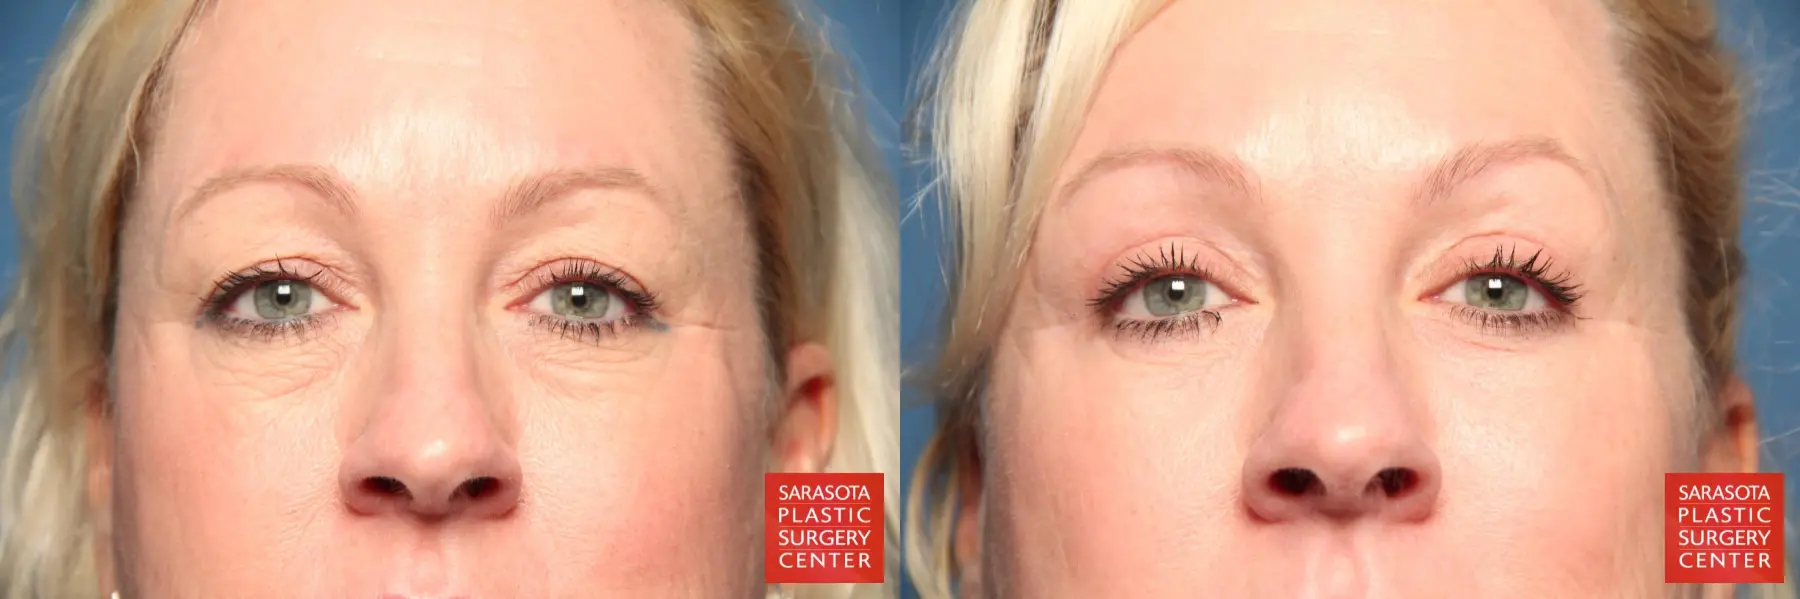 Eyelid Lift: Patient 4 - Before and After  